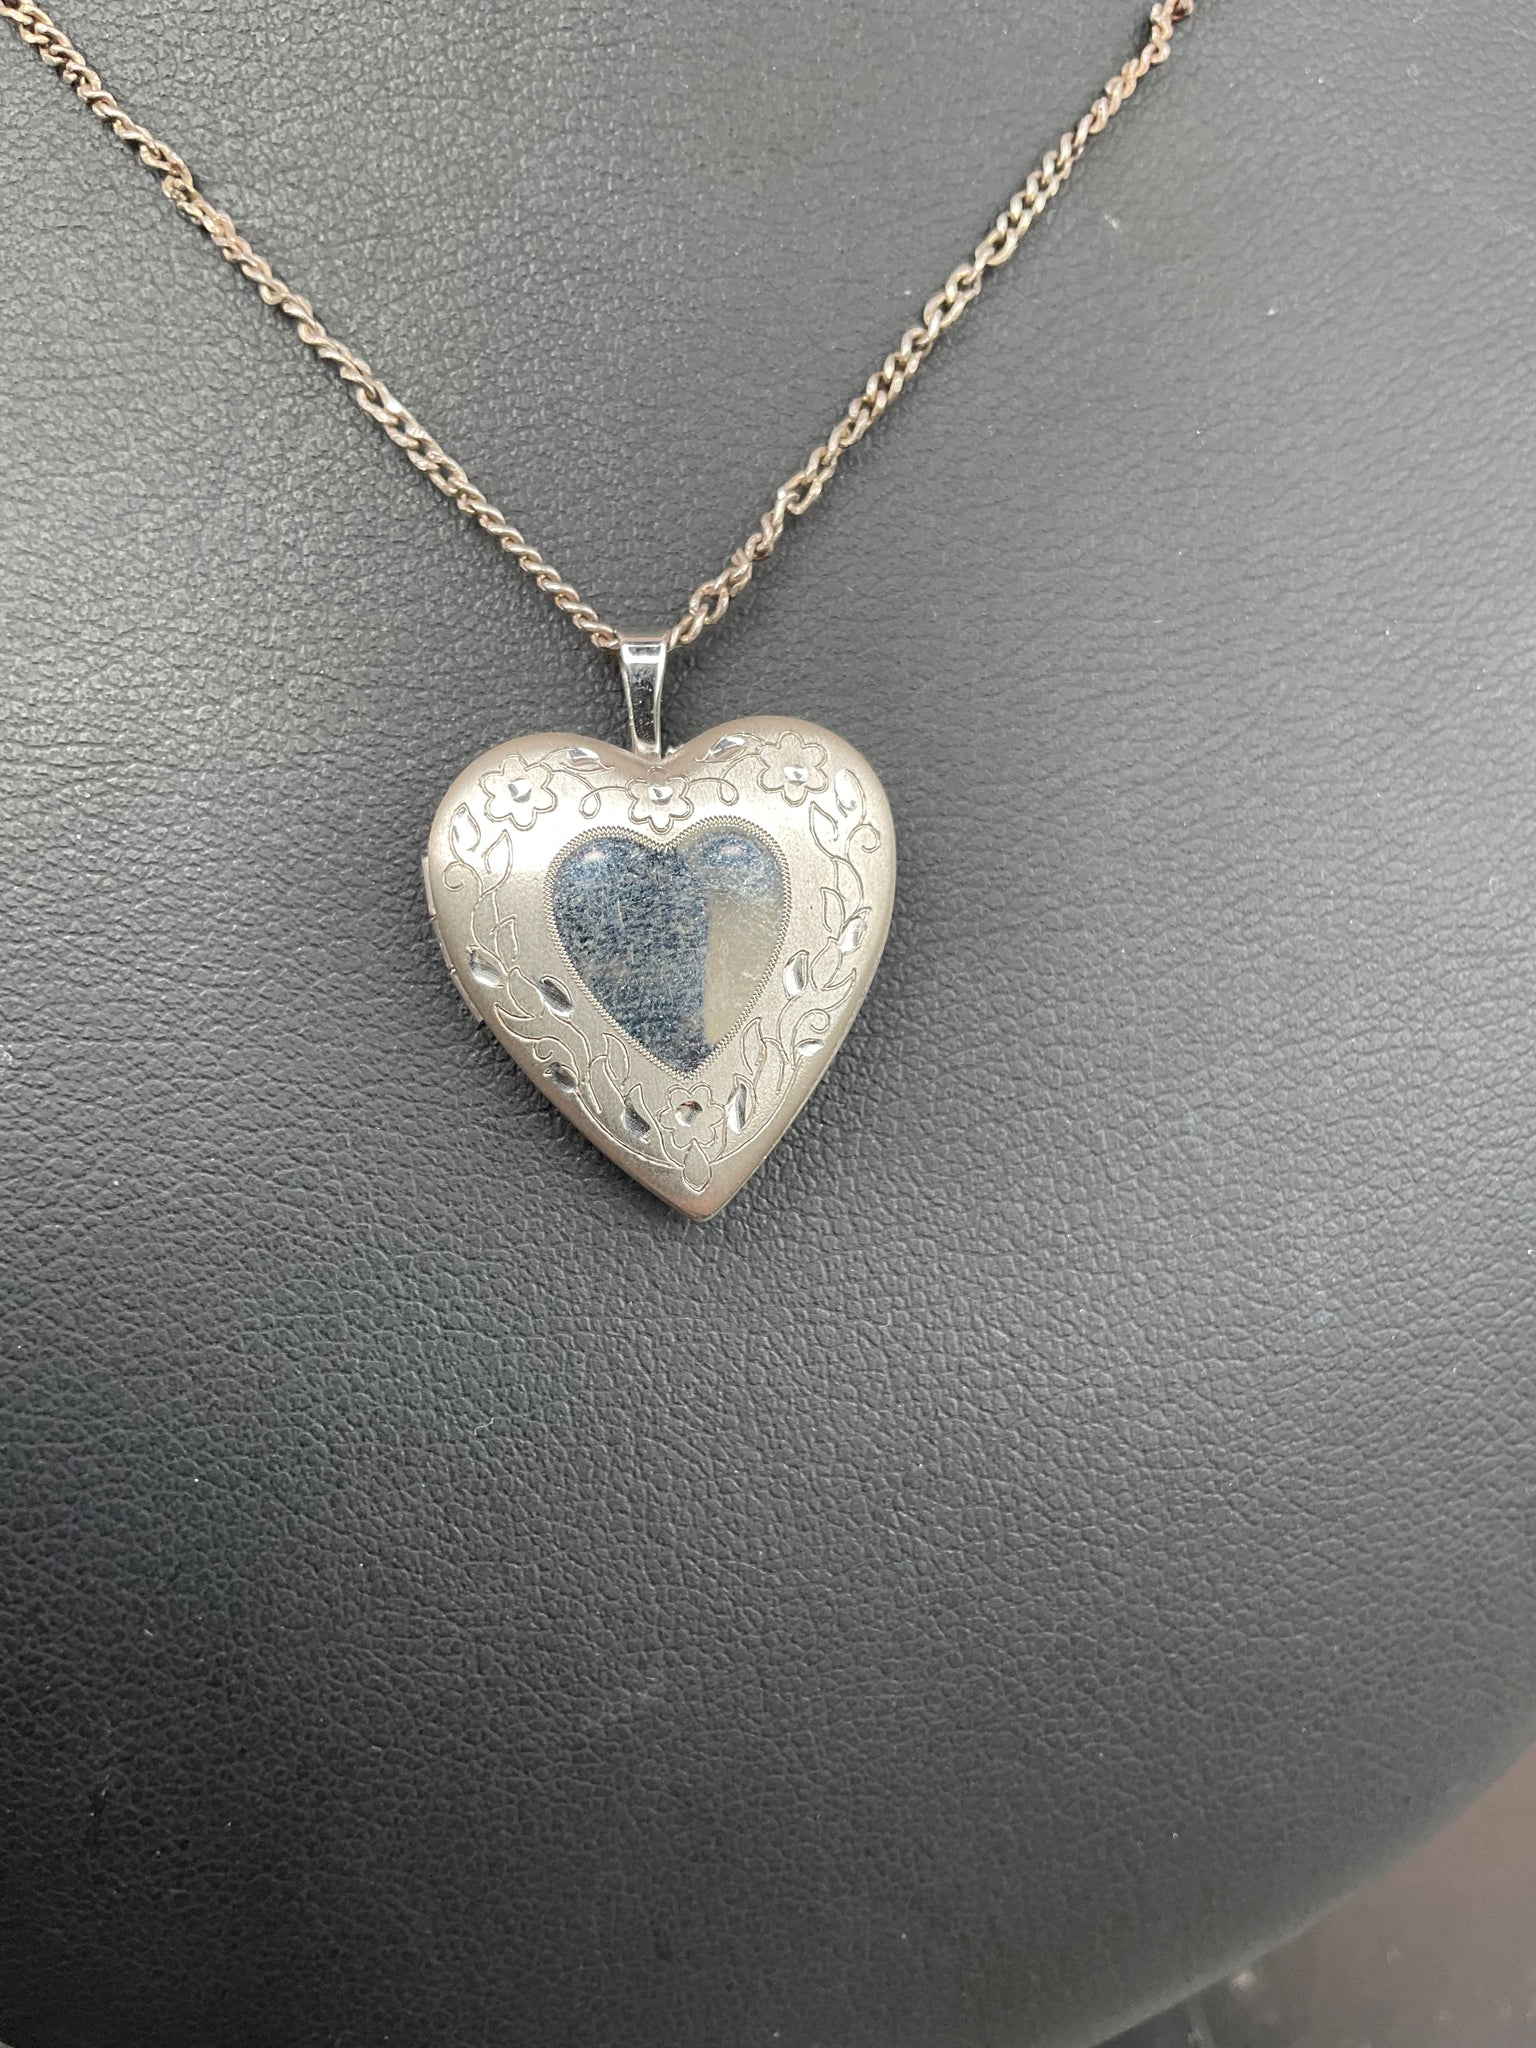 Vintage Silver Engraved Heart Locket and Chain